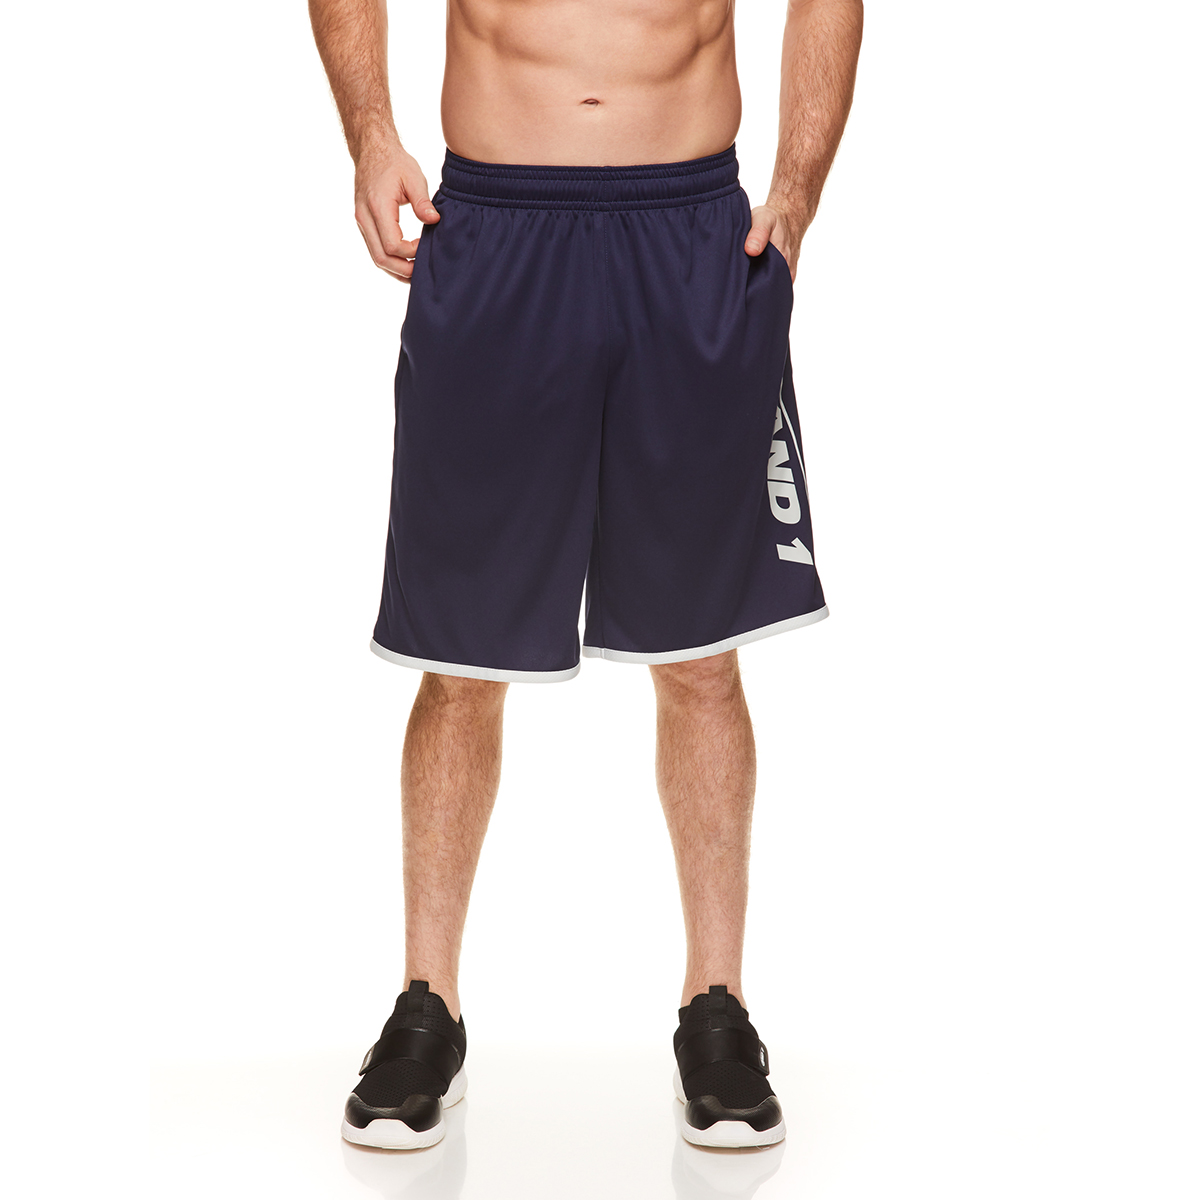 And1 Men's New Generation Classic Short - Blue, S